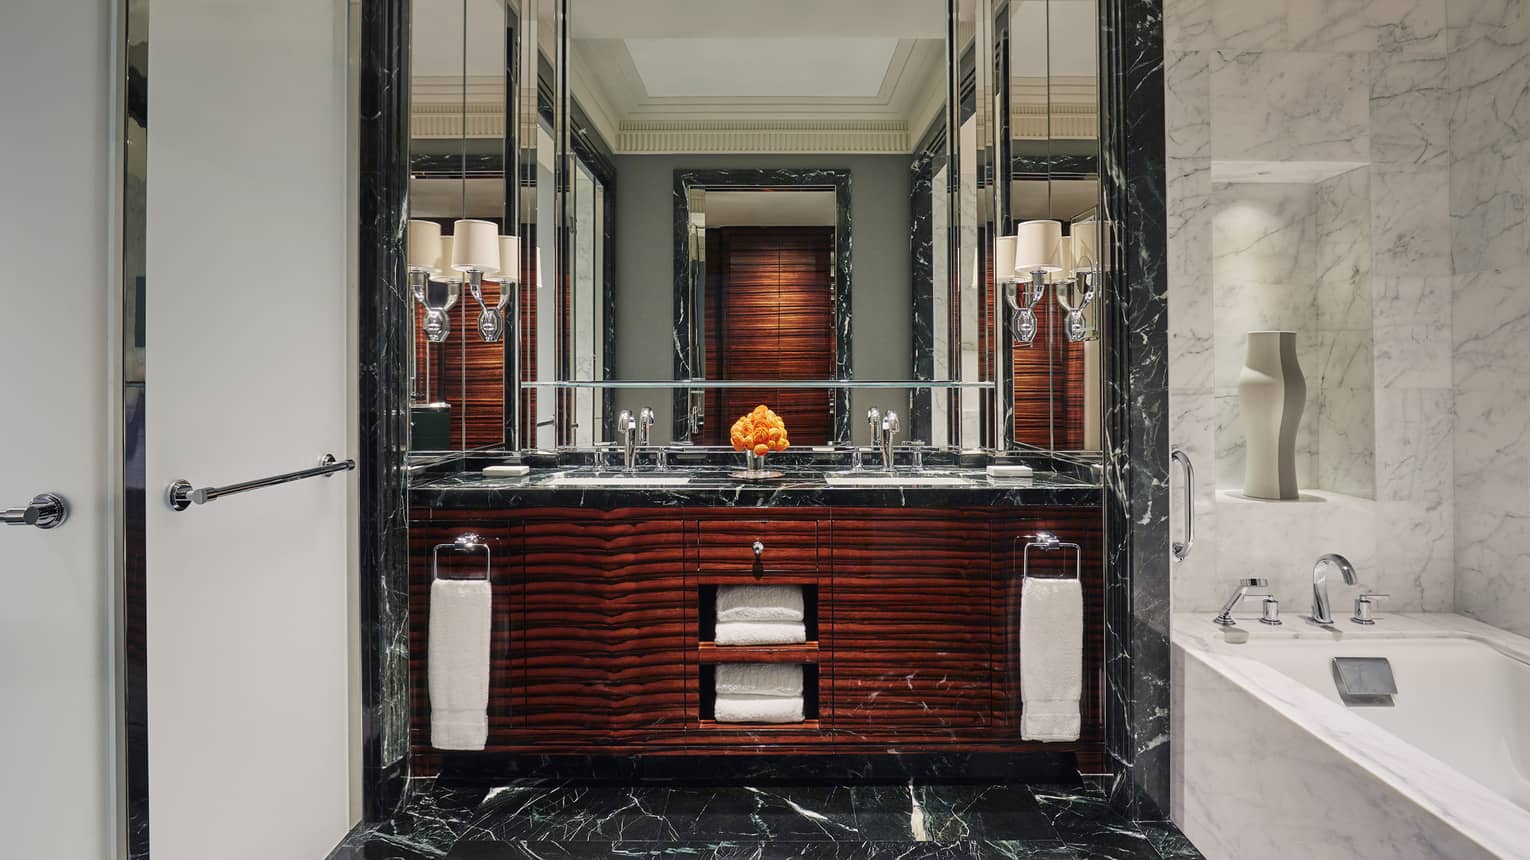 Large bathroom with black marble for the floor can vanity counter, dark wood veneer on the vanity cabinets and a white marble bathtub